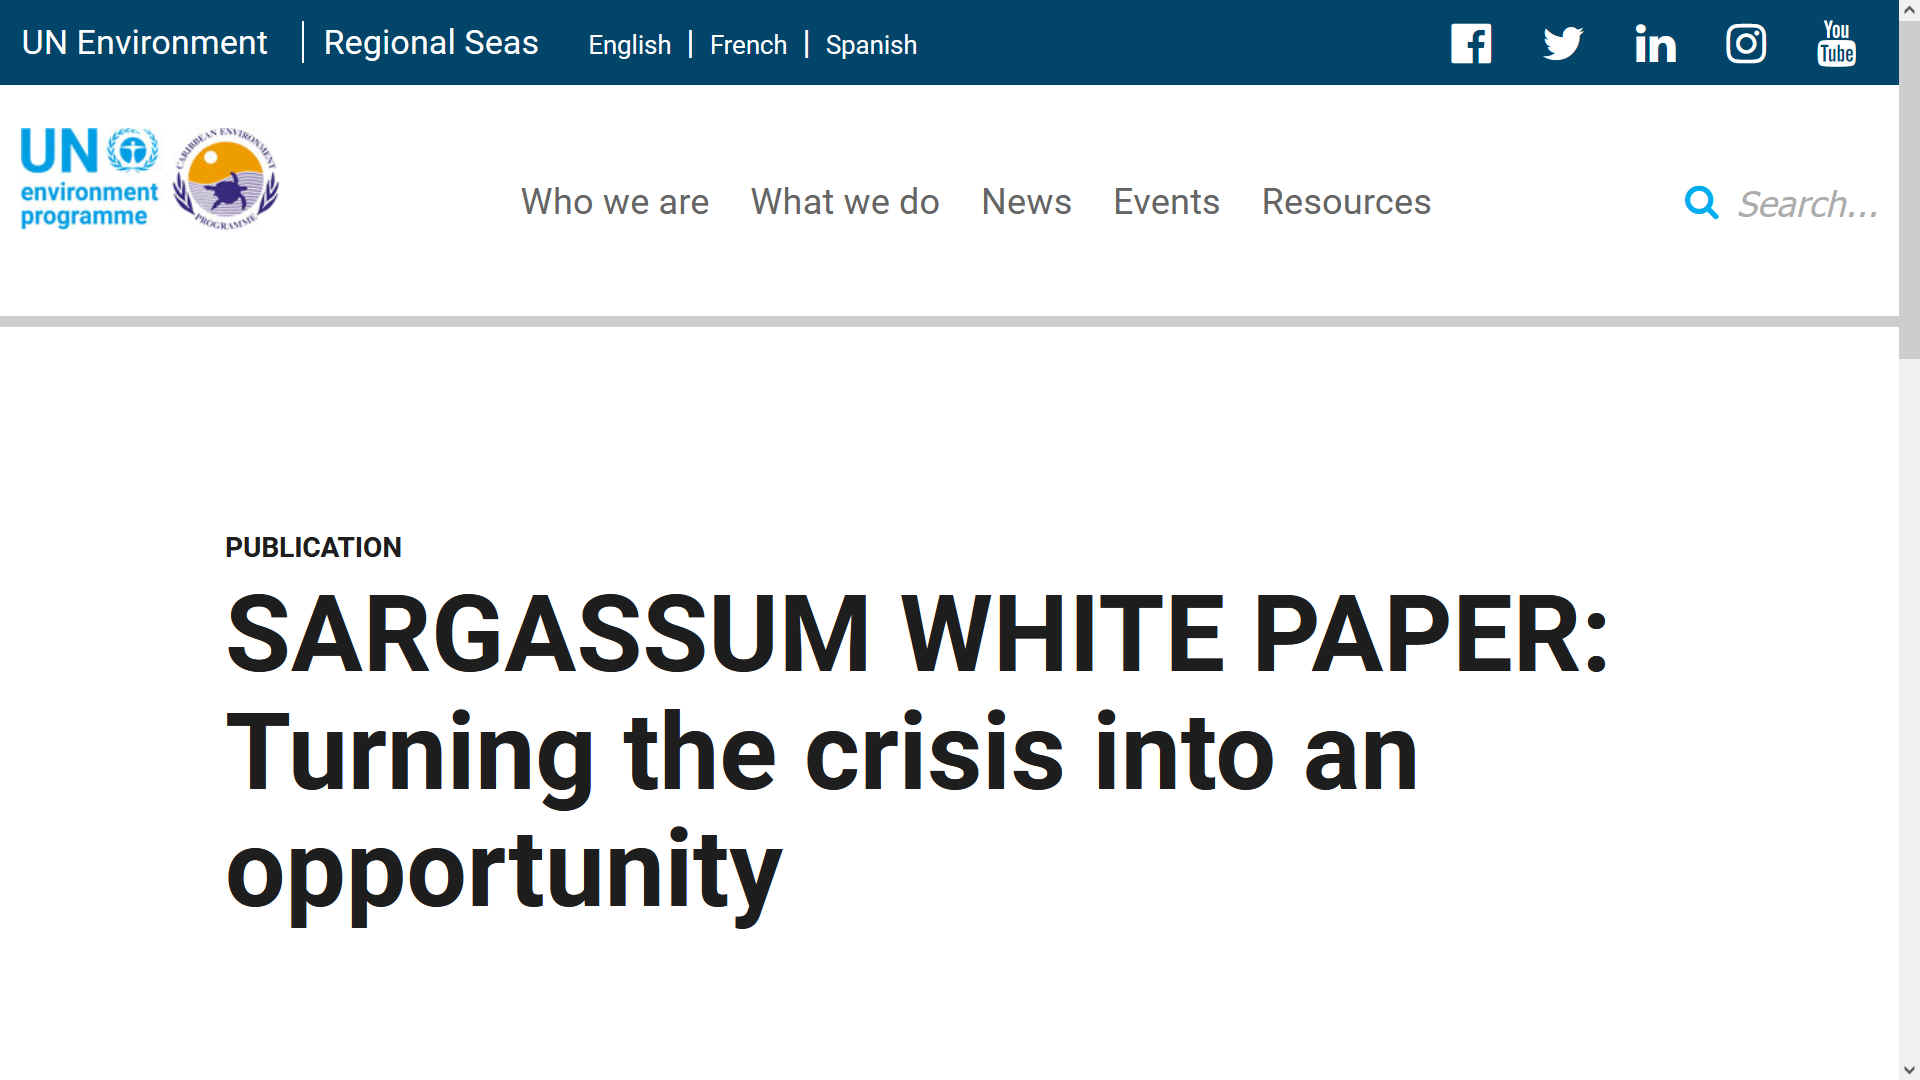 UNEP white paper on sargassum and turning the crisis into an opportunity